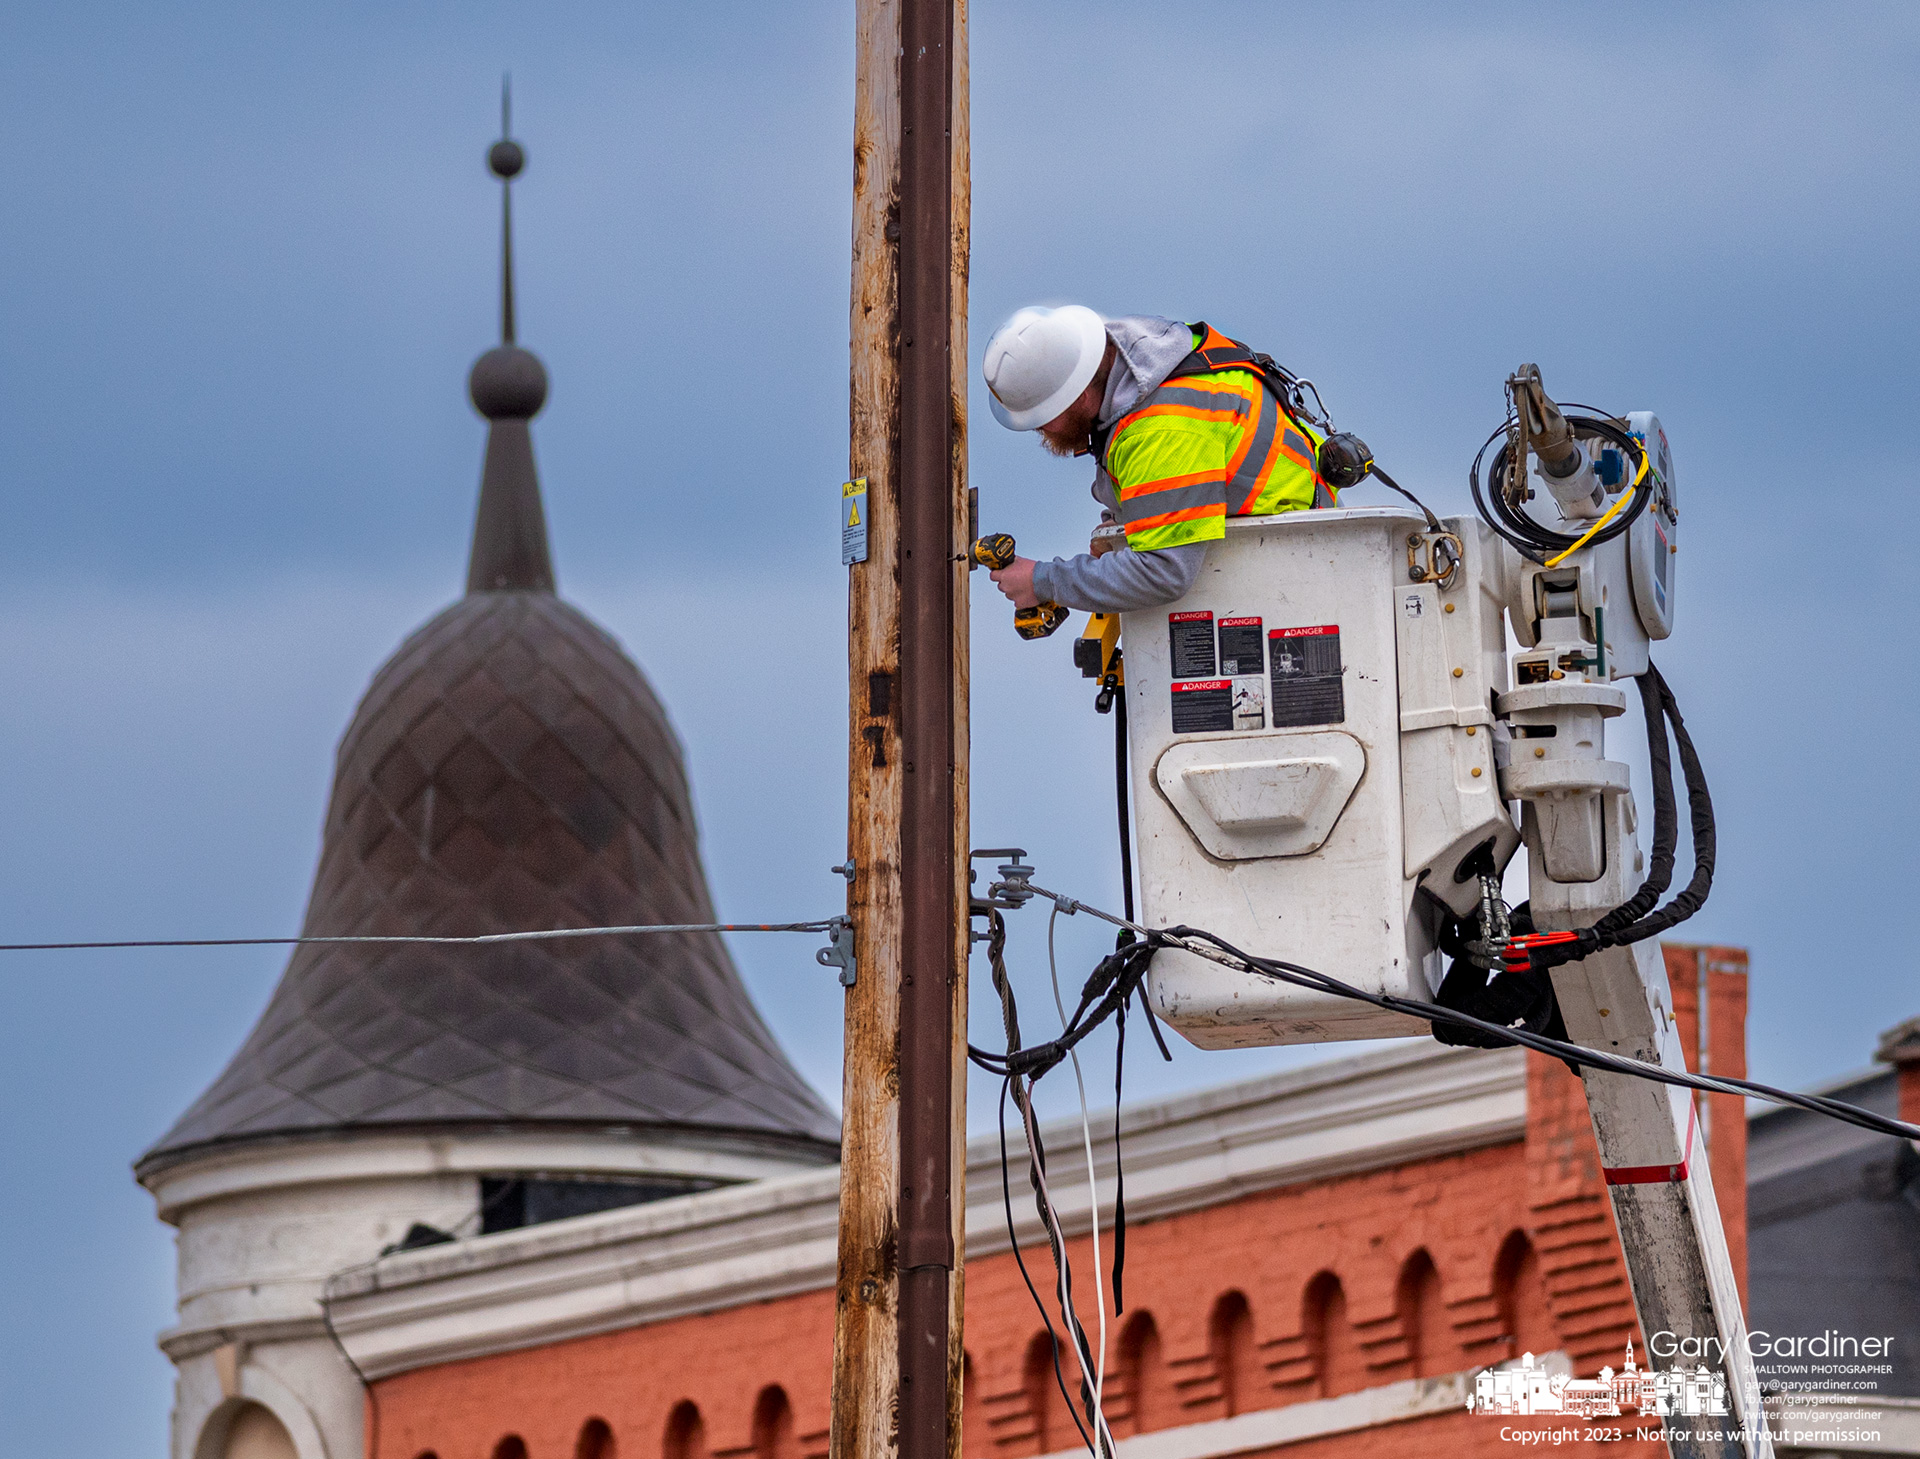 A technician fastens cables to a utility pole on West Main Street as part of an upgrade for cellular telephones in the Uptown Business District. My Final Photo for February 20, 2023.